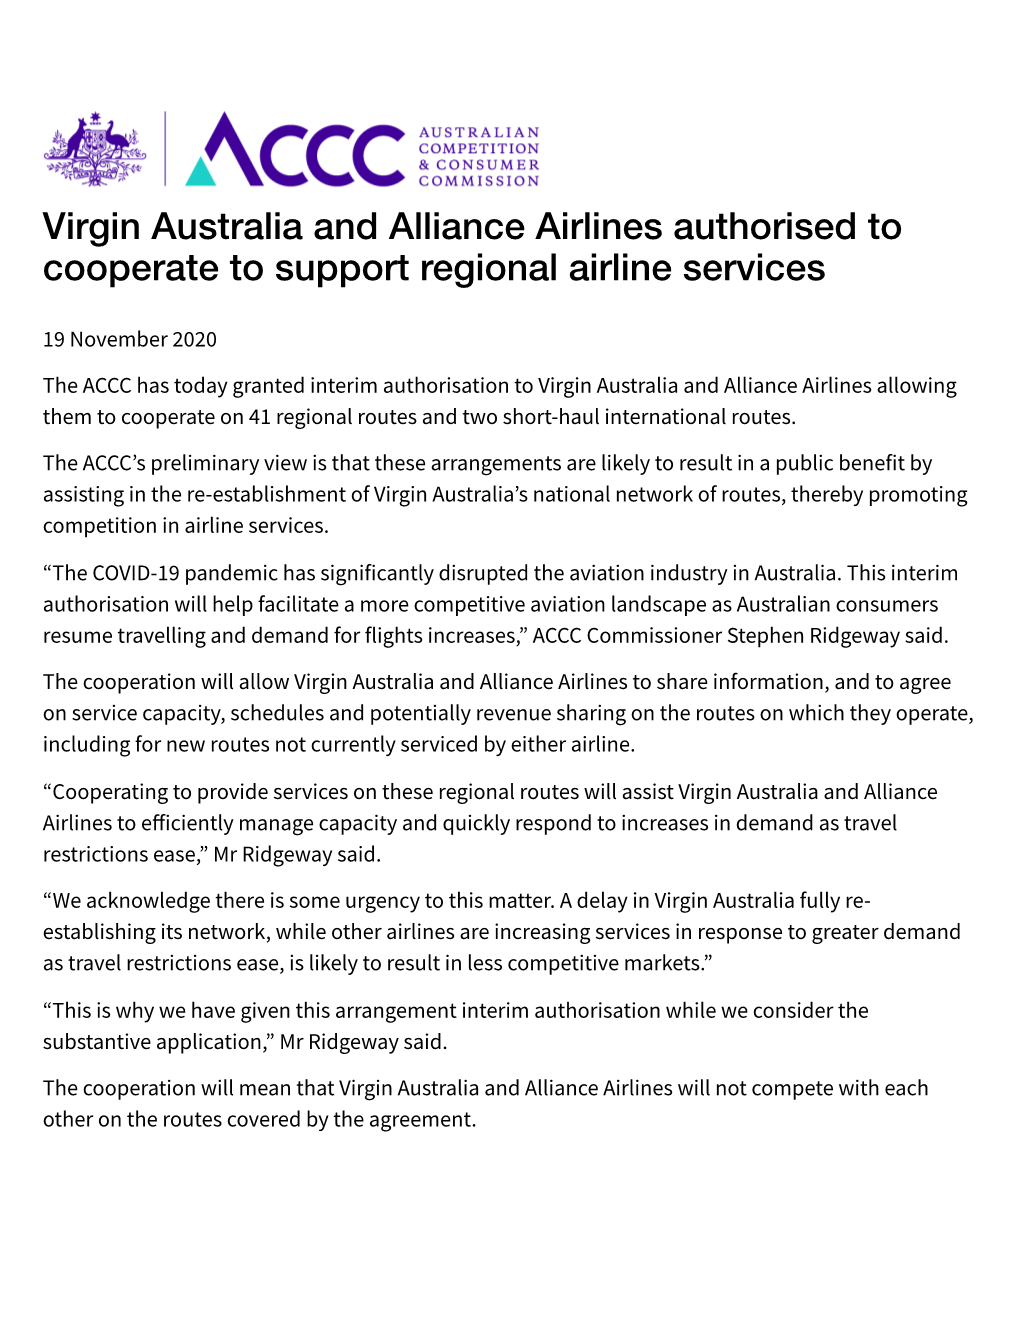 Virgin Australia and Alliance Airlines Authorised to Cooperate to Support Regional Airline Services